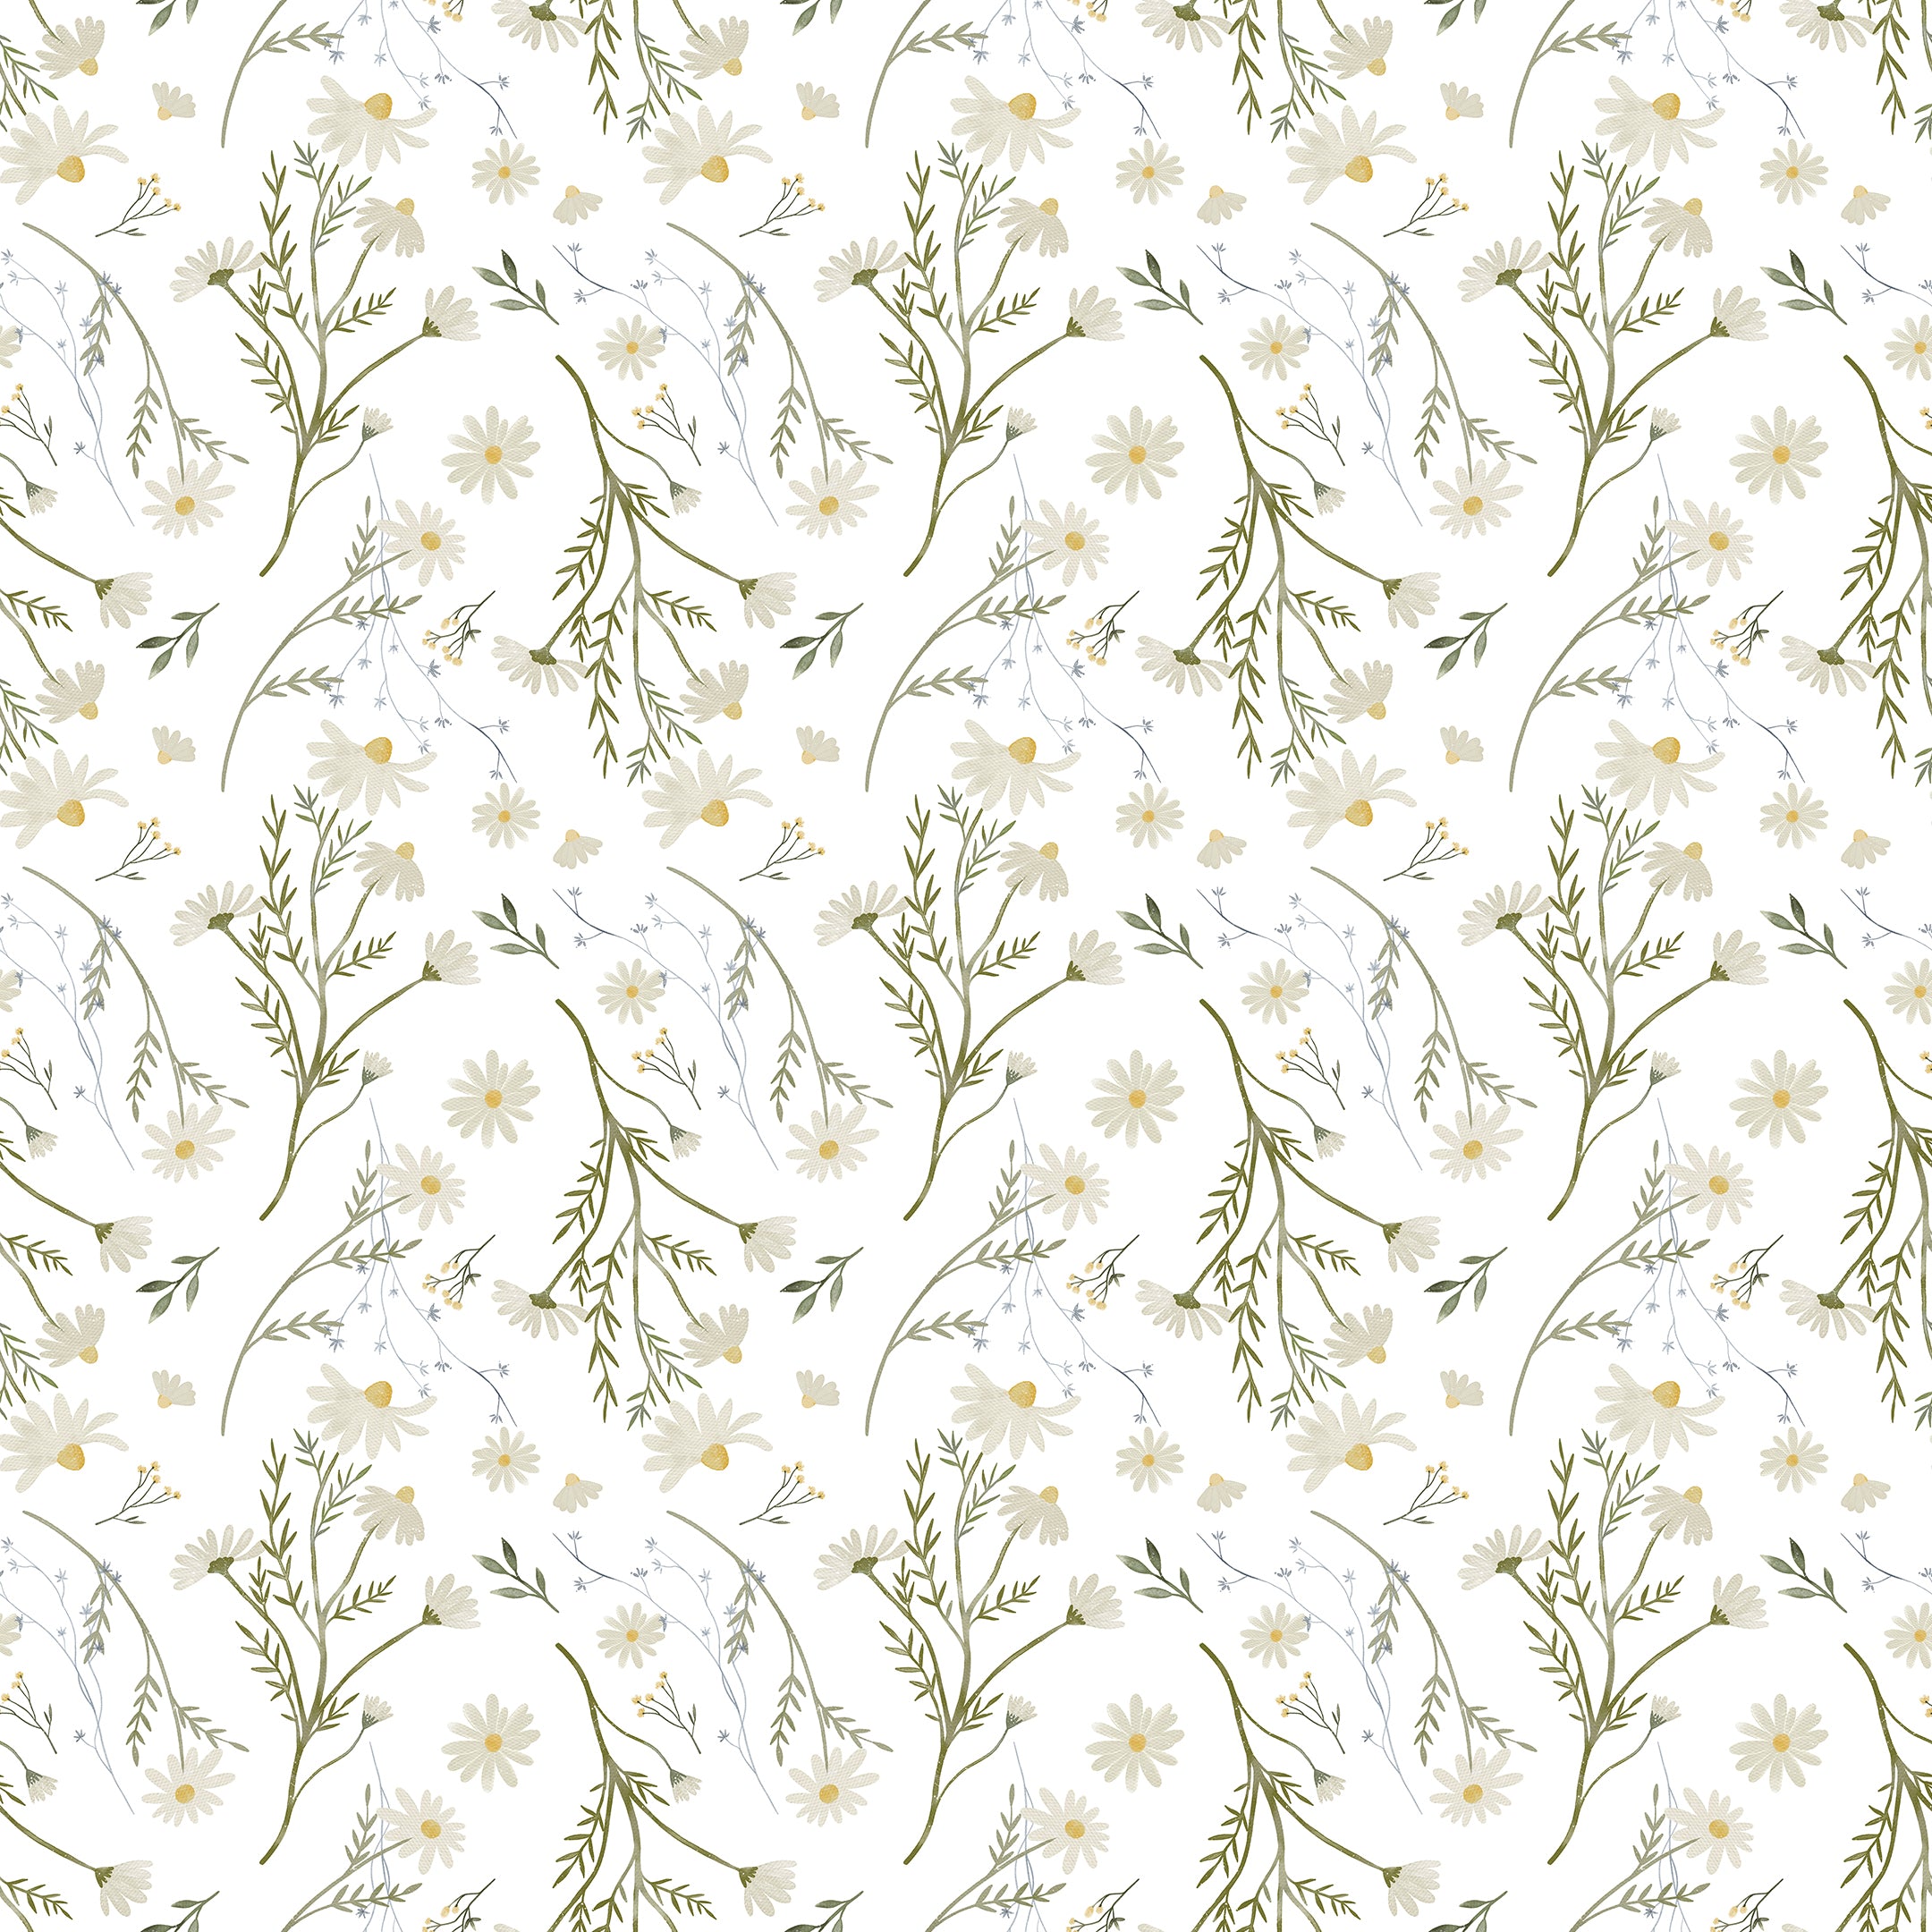 A delicate and serene pattern of "Daisy Bouquet Wallpaper - Large" showing a beautiful array of daisies and wildflowers in soft white and yellow hues, intertwined with subtle green foliage, set against a clean white background. This design brings a refreshing and natural feel suitable for brightening any living space.